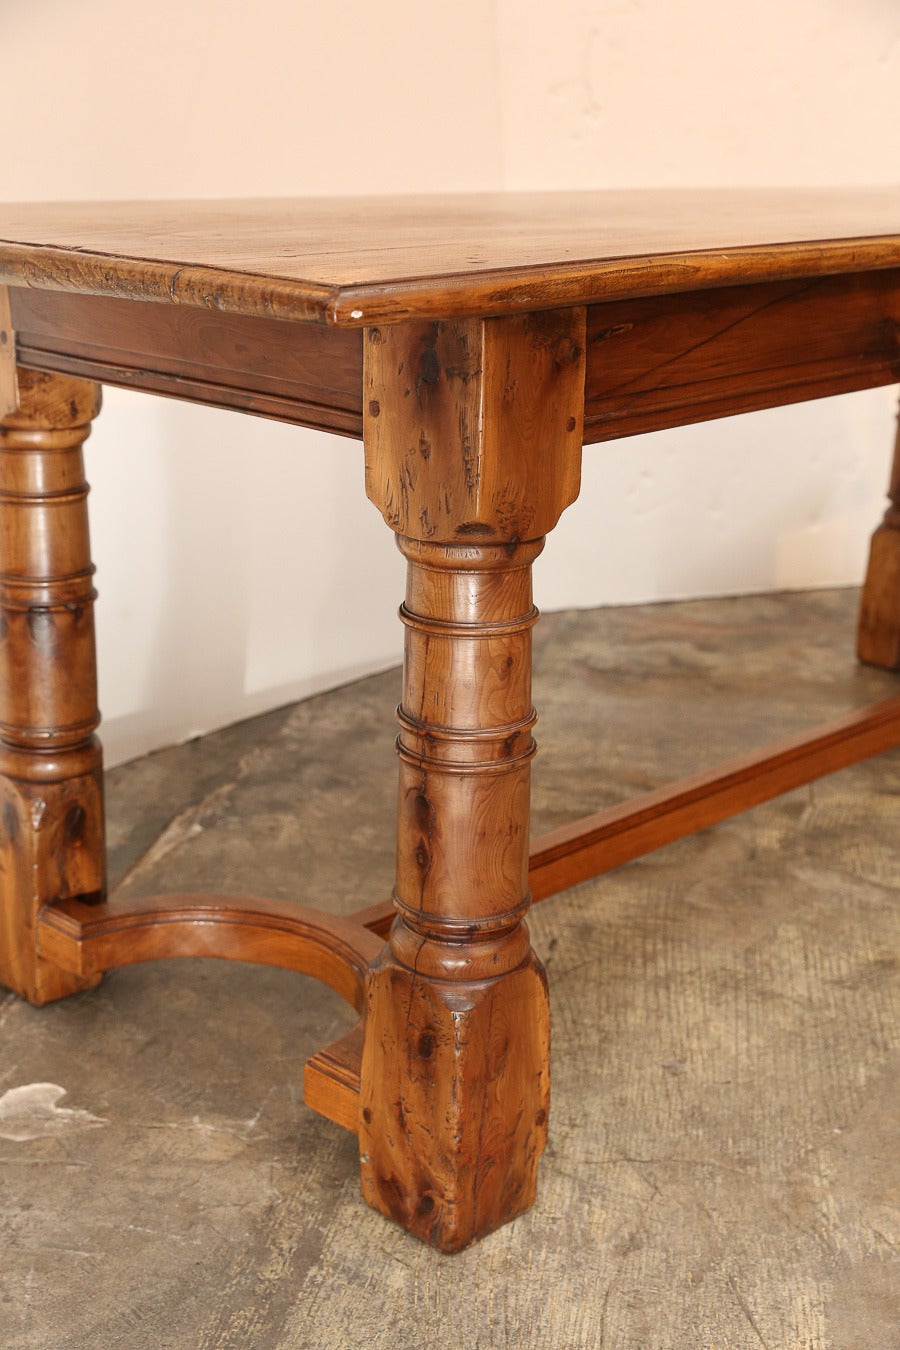 Antique Chestnut Console Table with heavy turned legs joined by a stretcher.